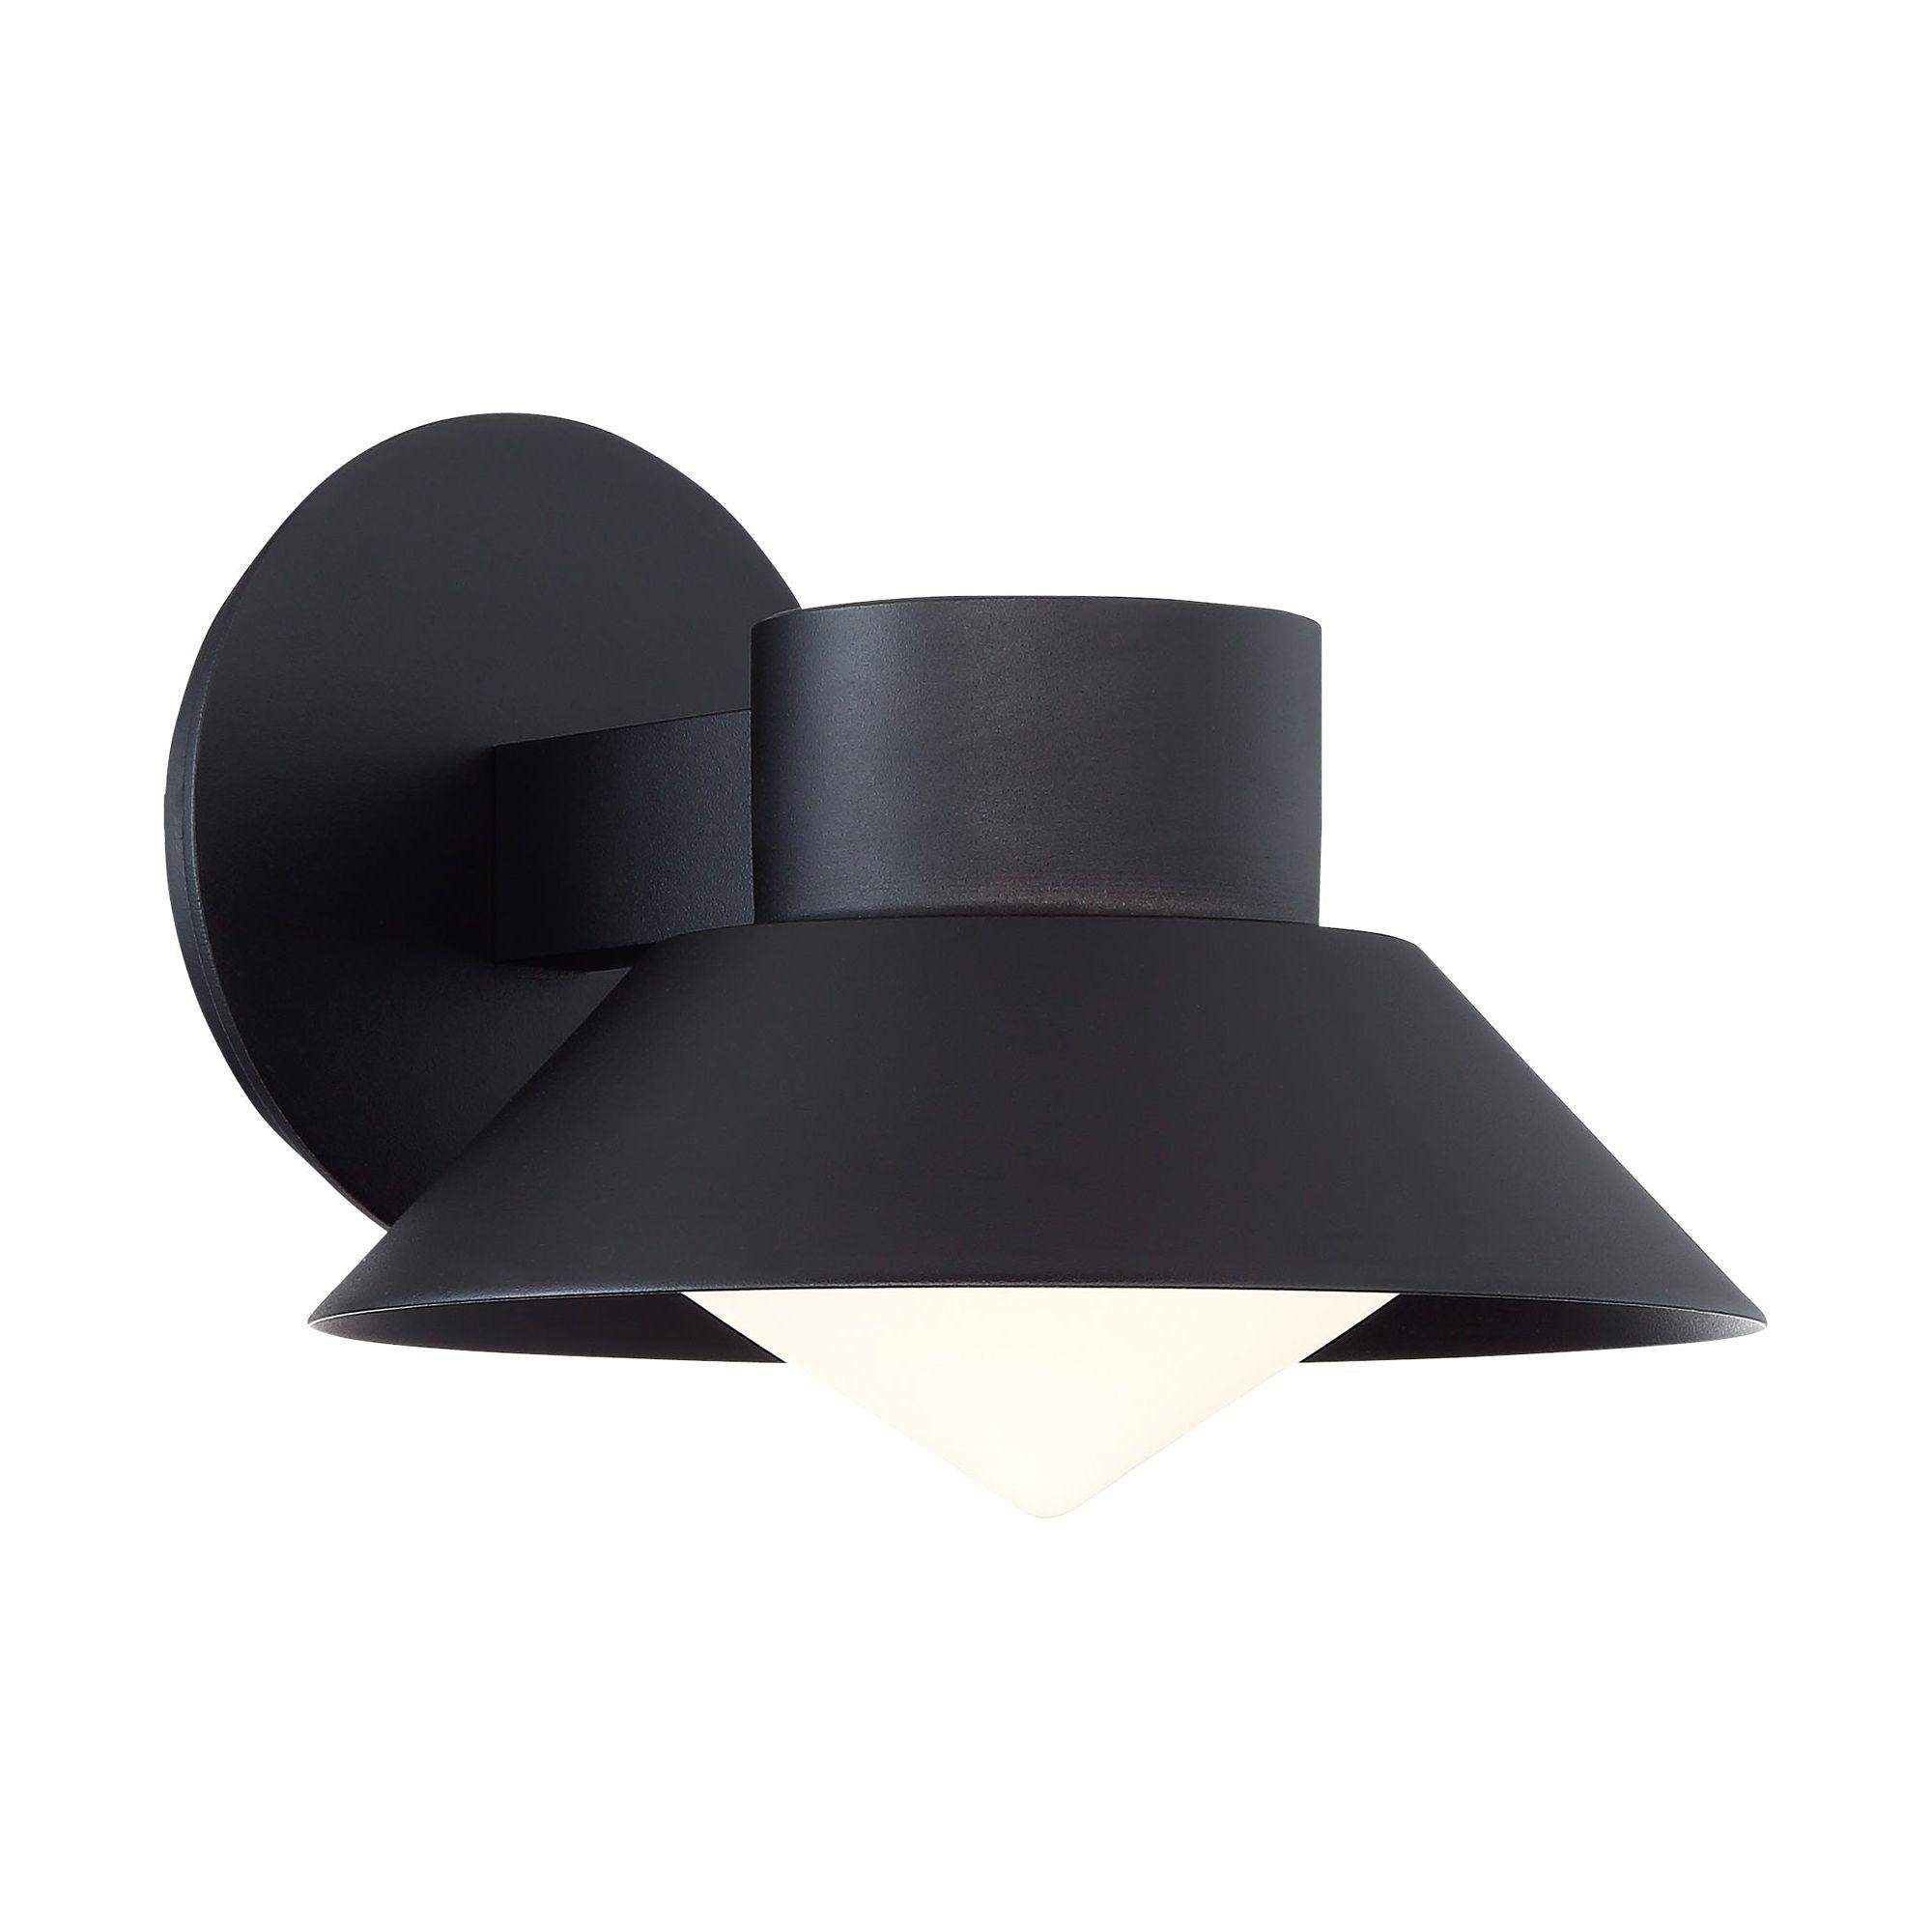 Modern Forms - Oslo 8" LED Indoor/Outdoor Wall Light - Lights Canada